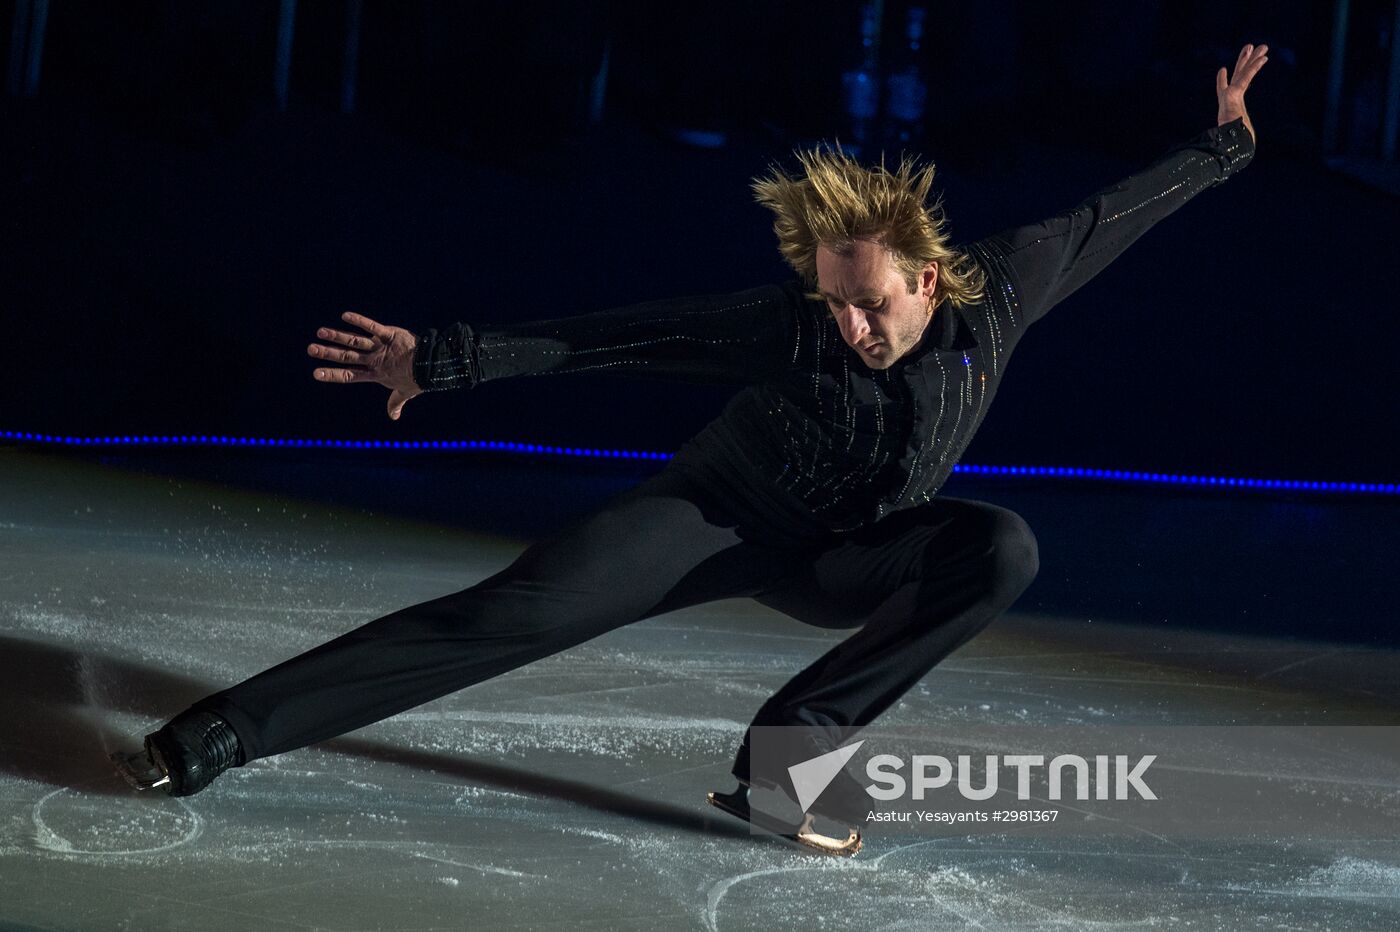 "Kings on Ice Present Fashion on Ice" show in Yerevan